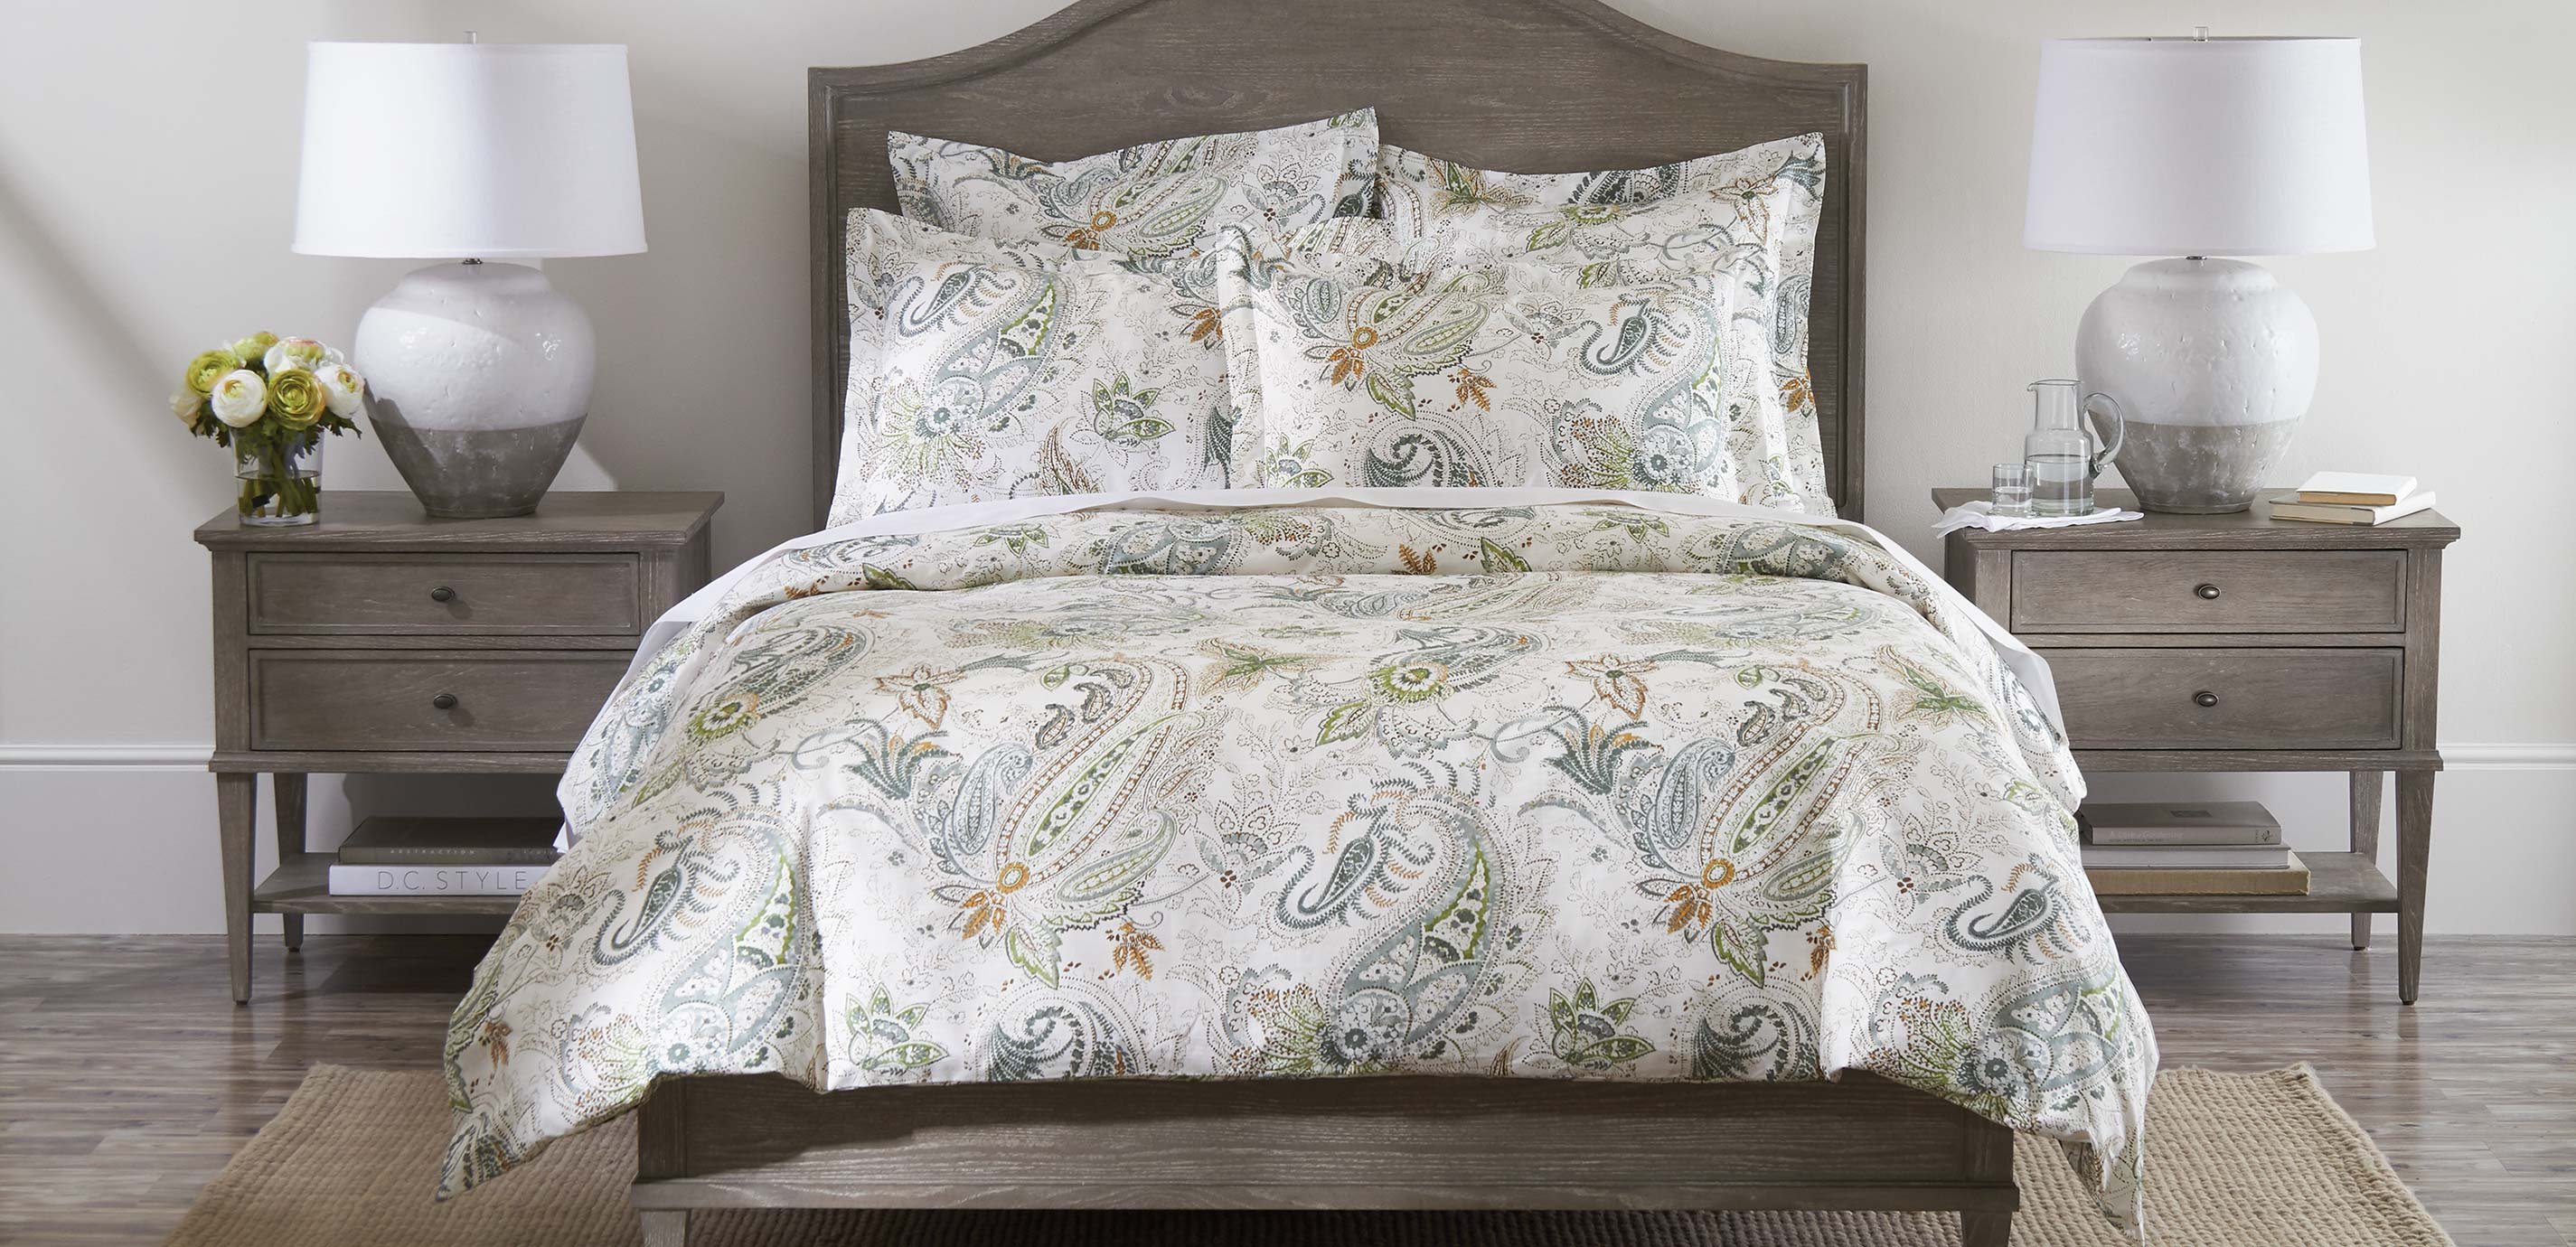 Spring Green Paisley Duvet Cover And, Duvet Covers Stay In Place